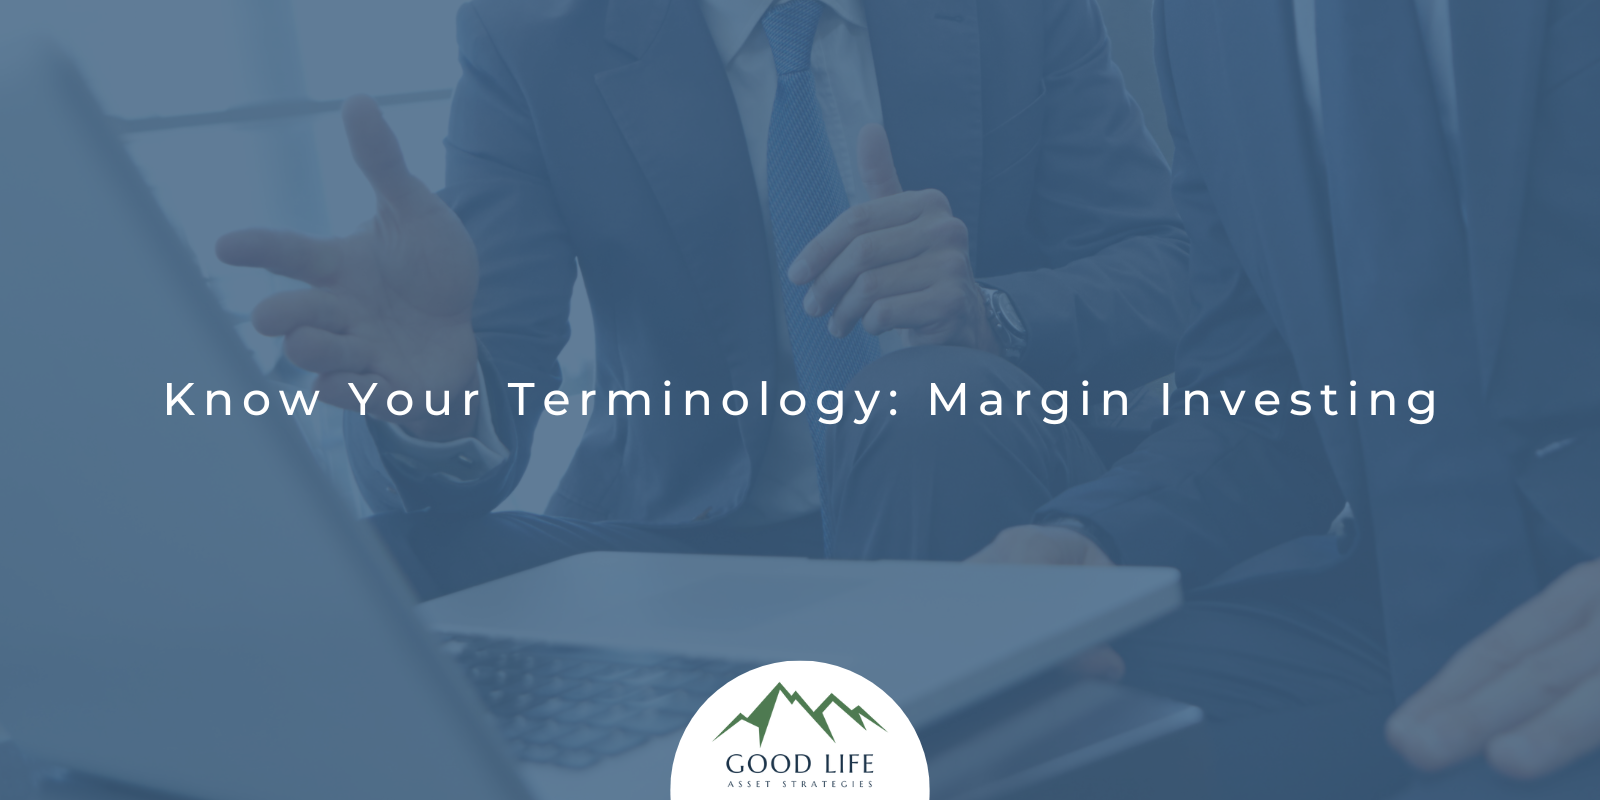 Know Your Terminology: Margin Investing